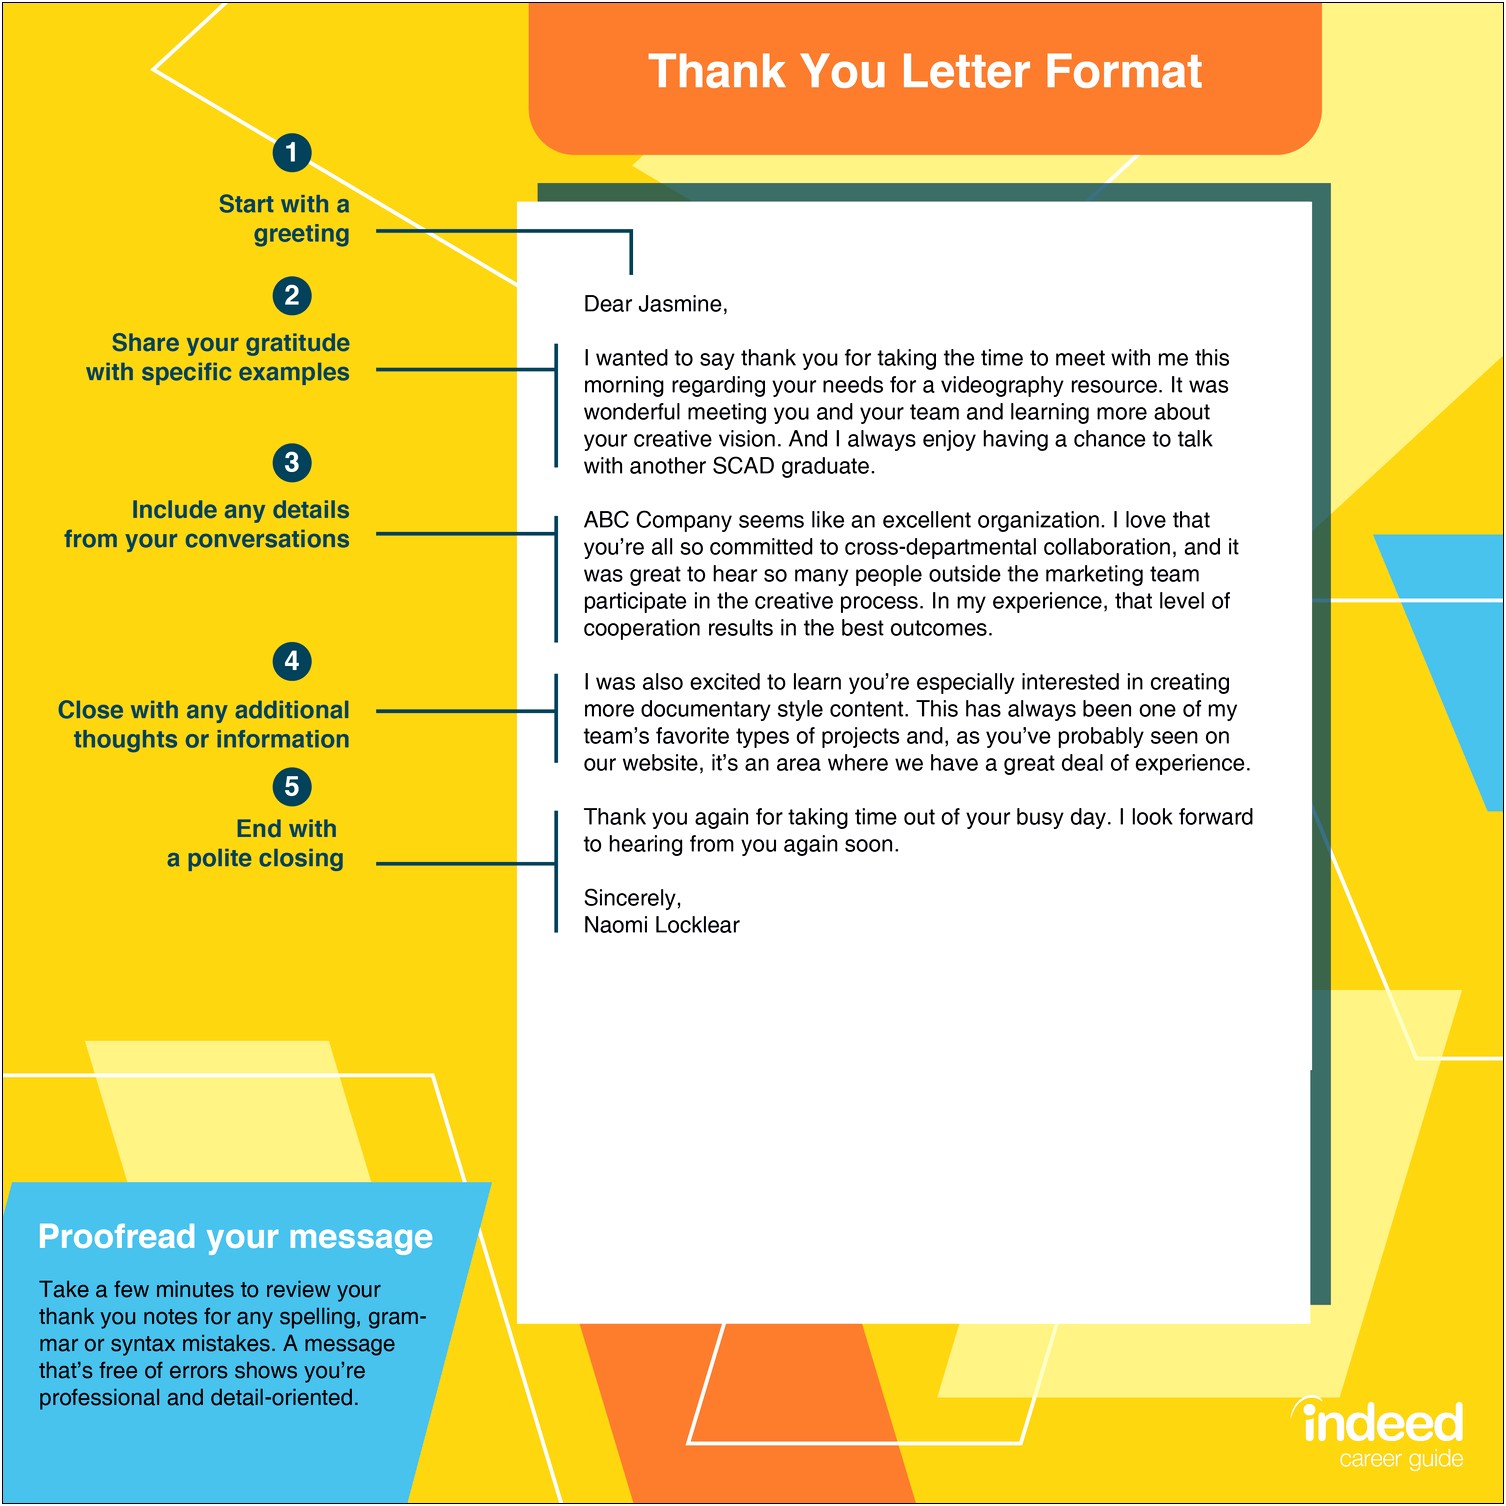 Can You Use Thank You Letter Templates